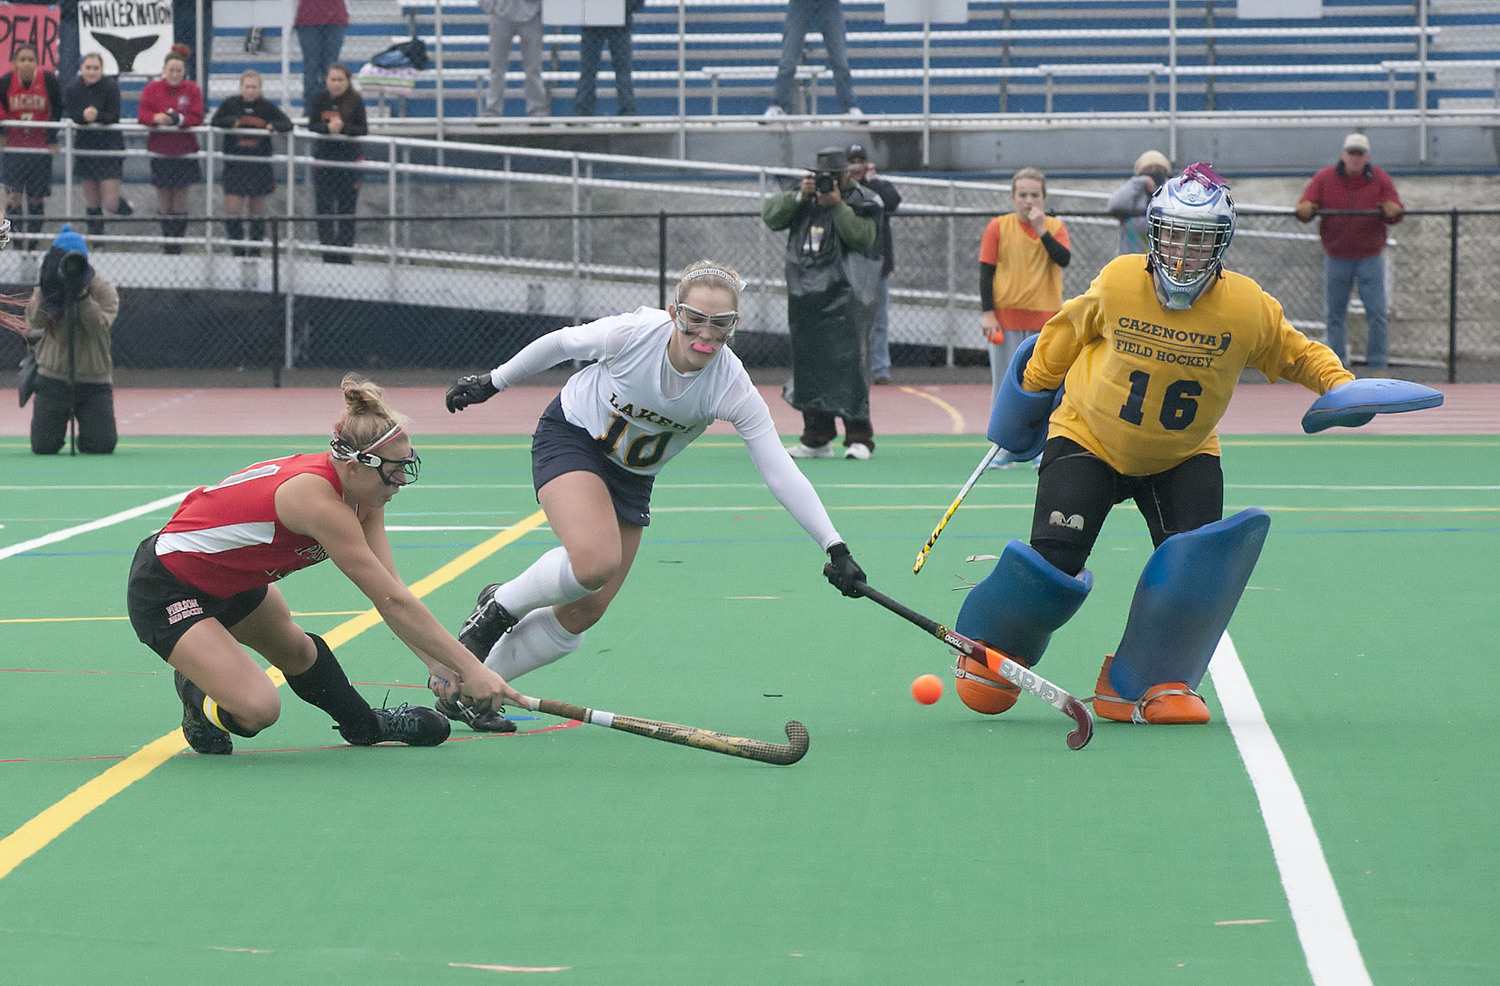 Pierson's Kasey Gilbride takes a shot on goal during the NYSPHSAA Class C Final field hockey playoff between the Pierson/Bridgehampton Lady Whalers and the Cazenovia Lady Lakers at Cicero High School on November 17, 2013.  MICHAEL HELLER